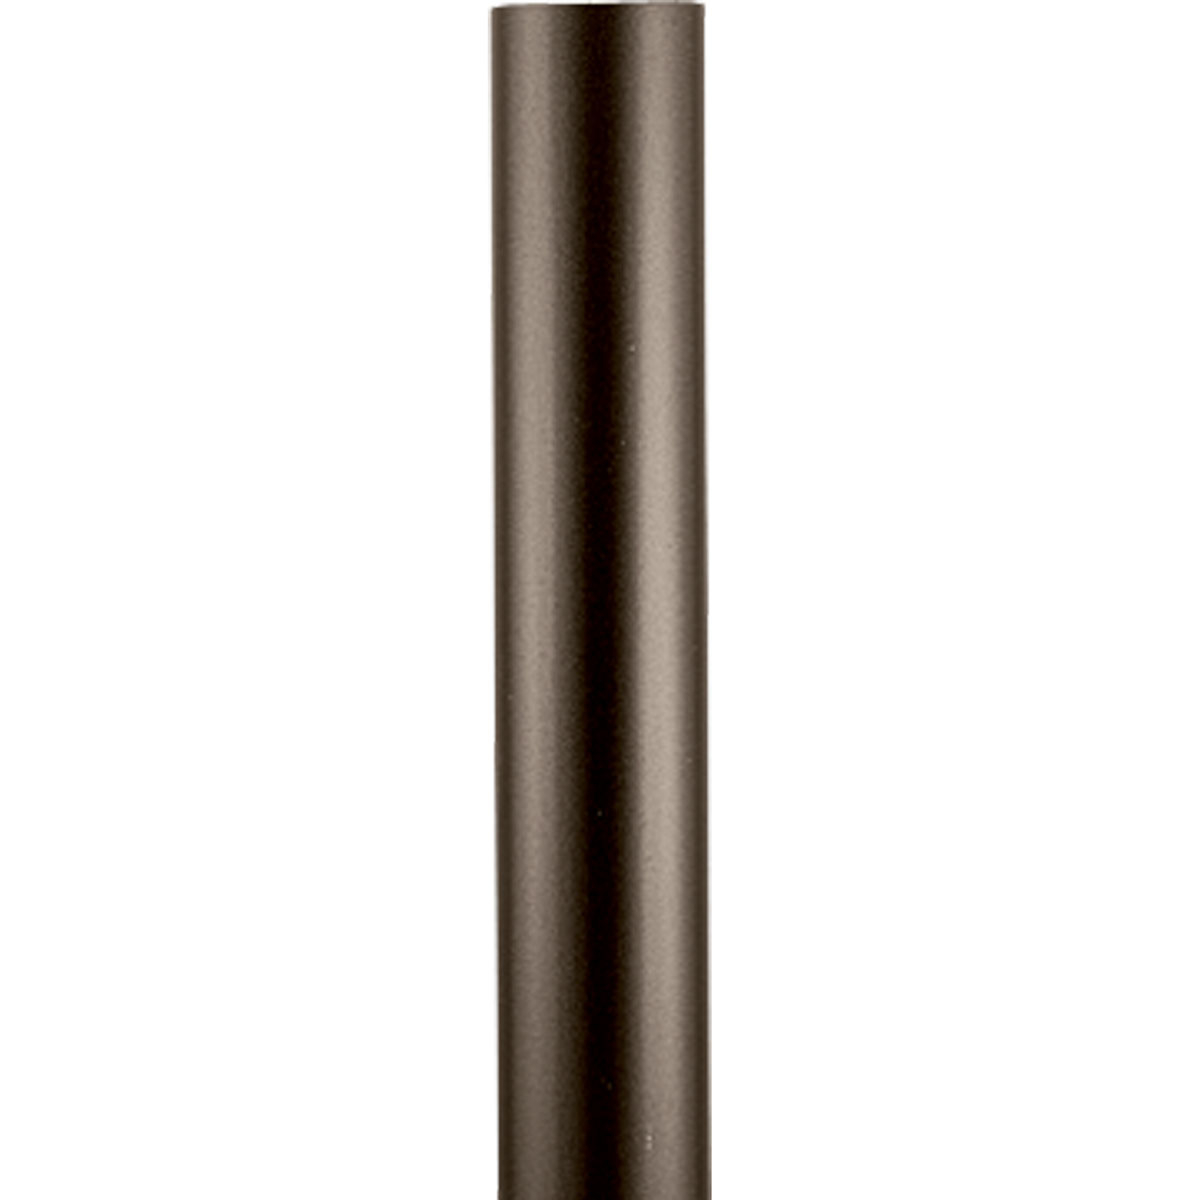 Surround your home with decorative posts to add style and security for years to come. 3 in posts fit Progress Lighting decorative lanterns. Post can be cut to desired length. This aluminum post will make a perfect addition to your home needs. 7' Aluminum Post in an Antique Bronze finish.